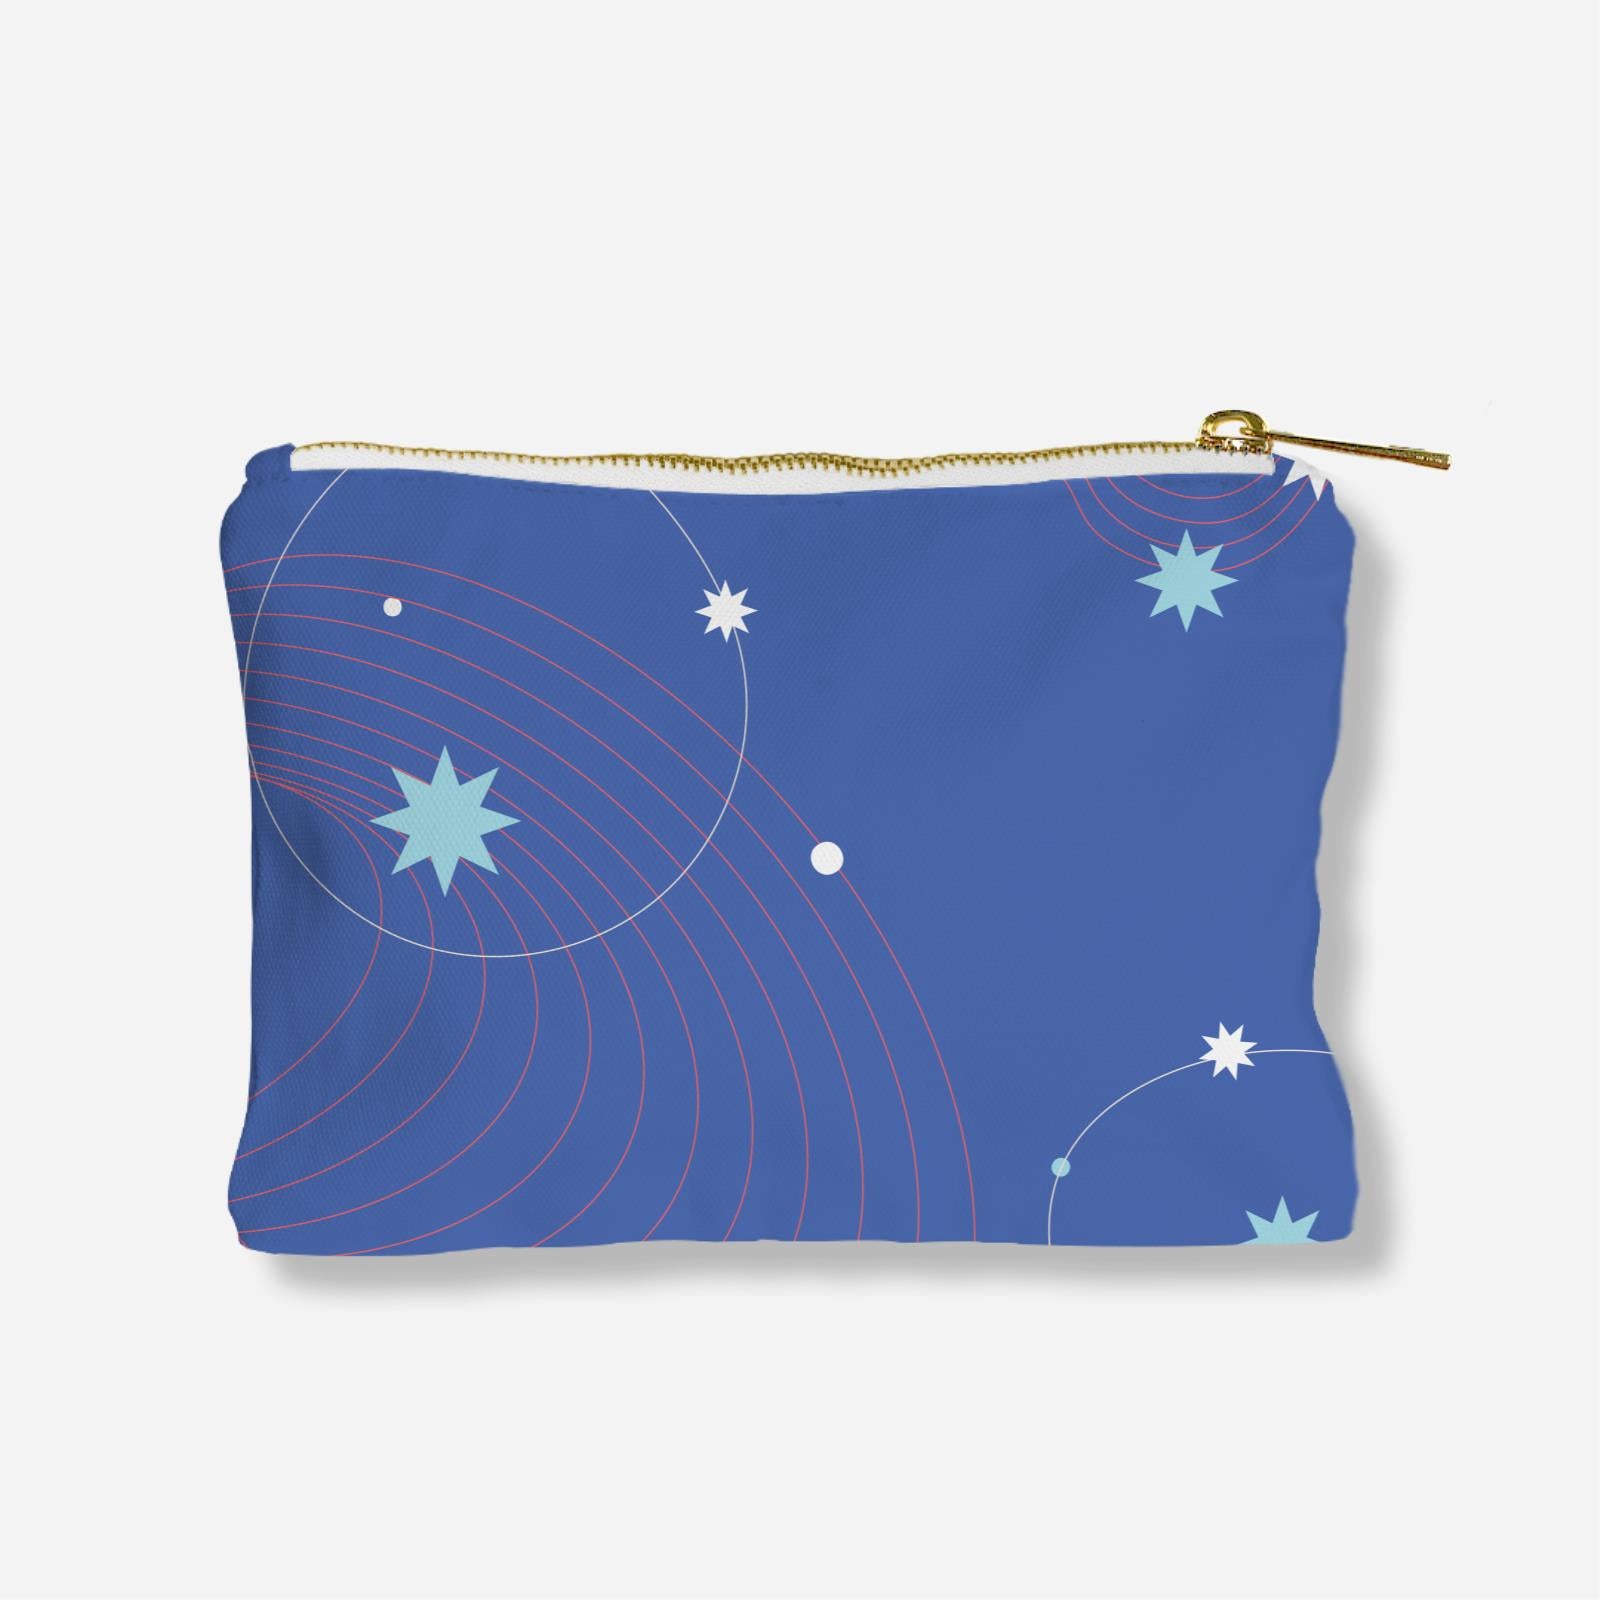 Be Confident Series Zipper Pouch - A Goal Without a Plan Is Just A Wish - Blue